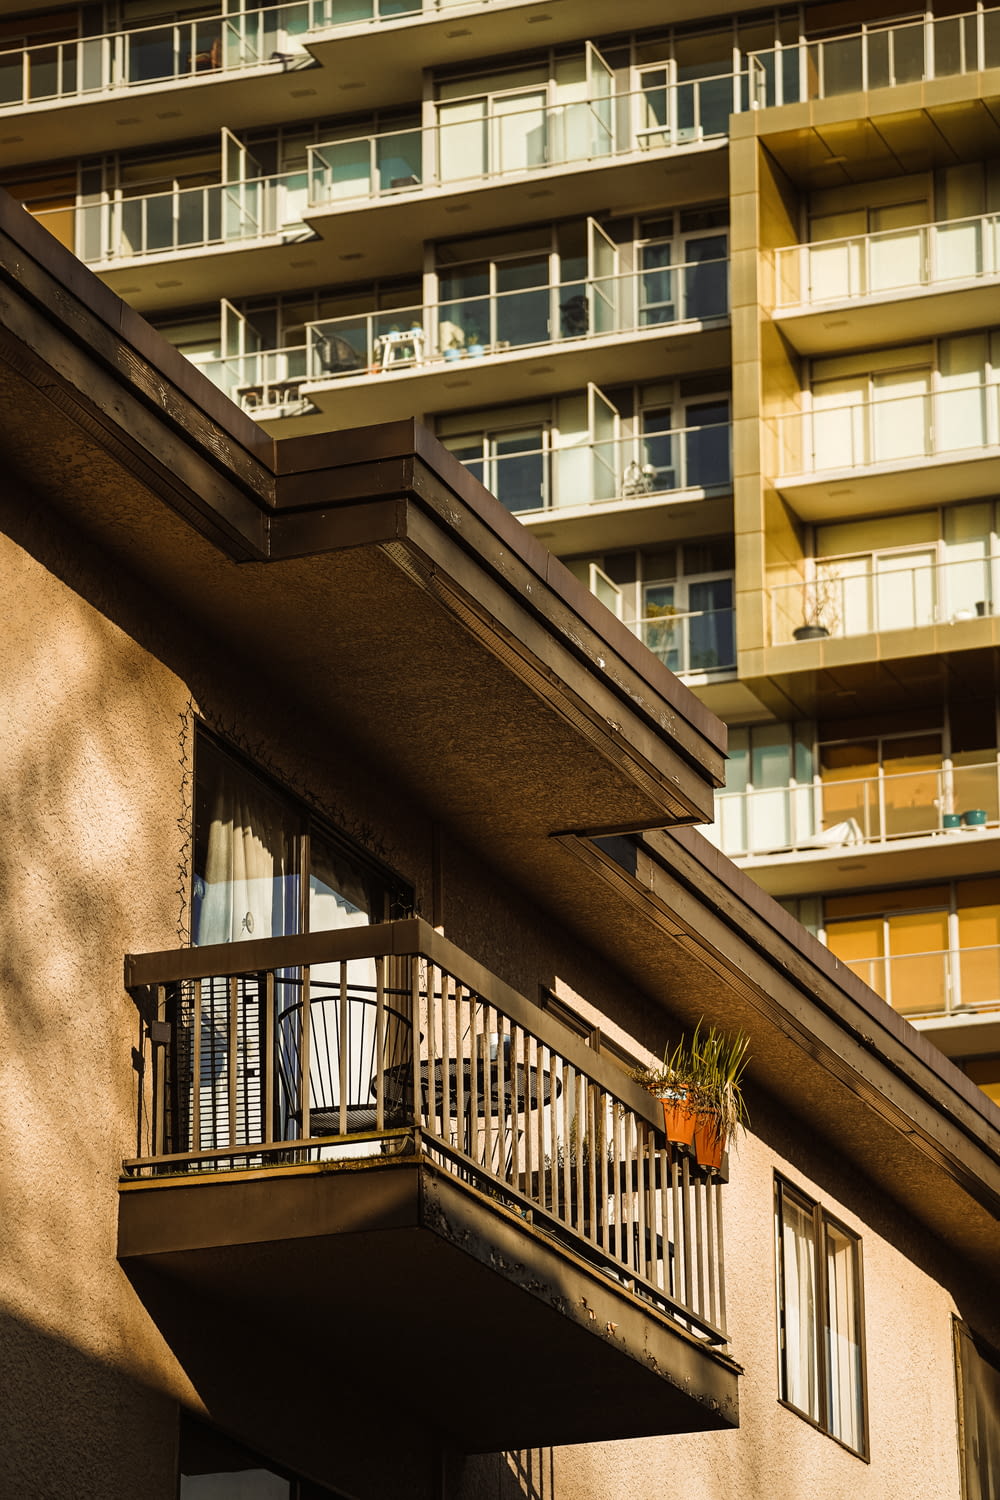 an apartment building with balconies and a balcony